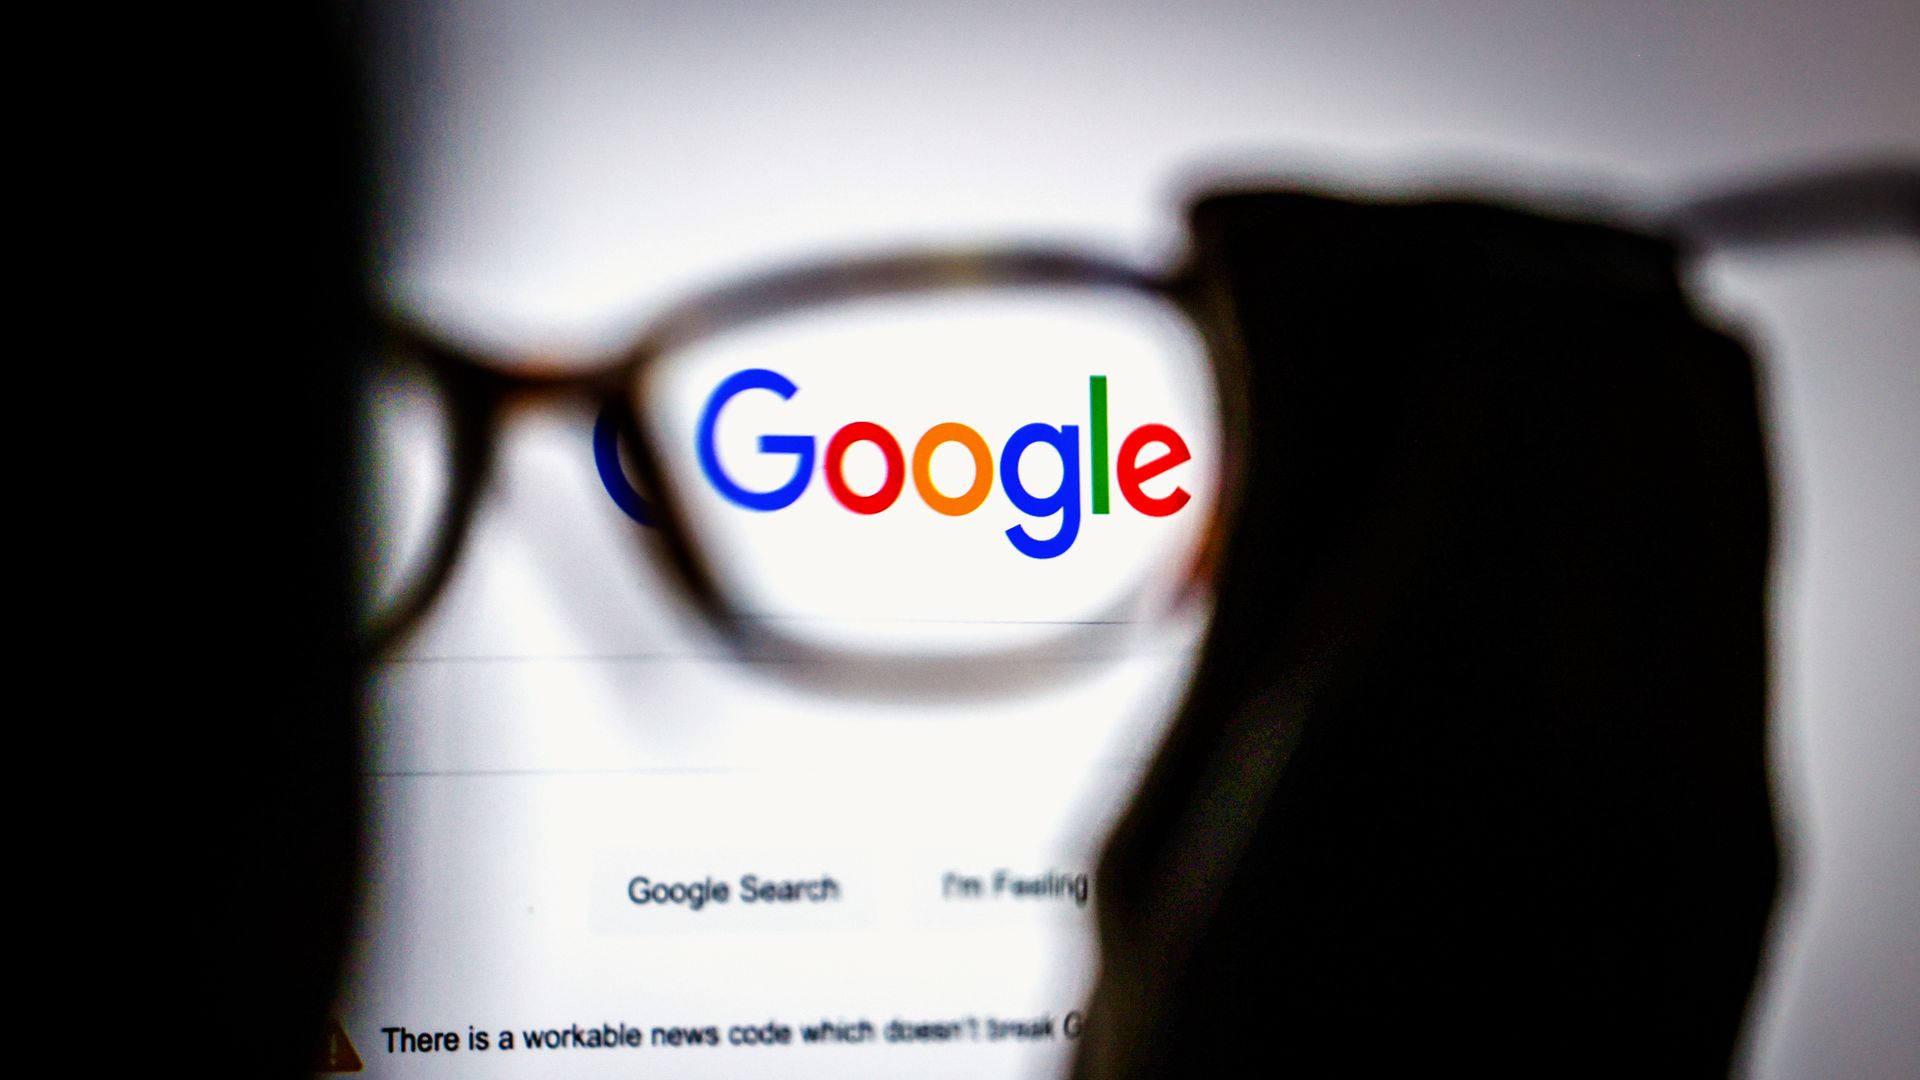 Photo of a screen showing the Google search page as a person holds up glasses that magnify the Google logo